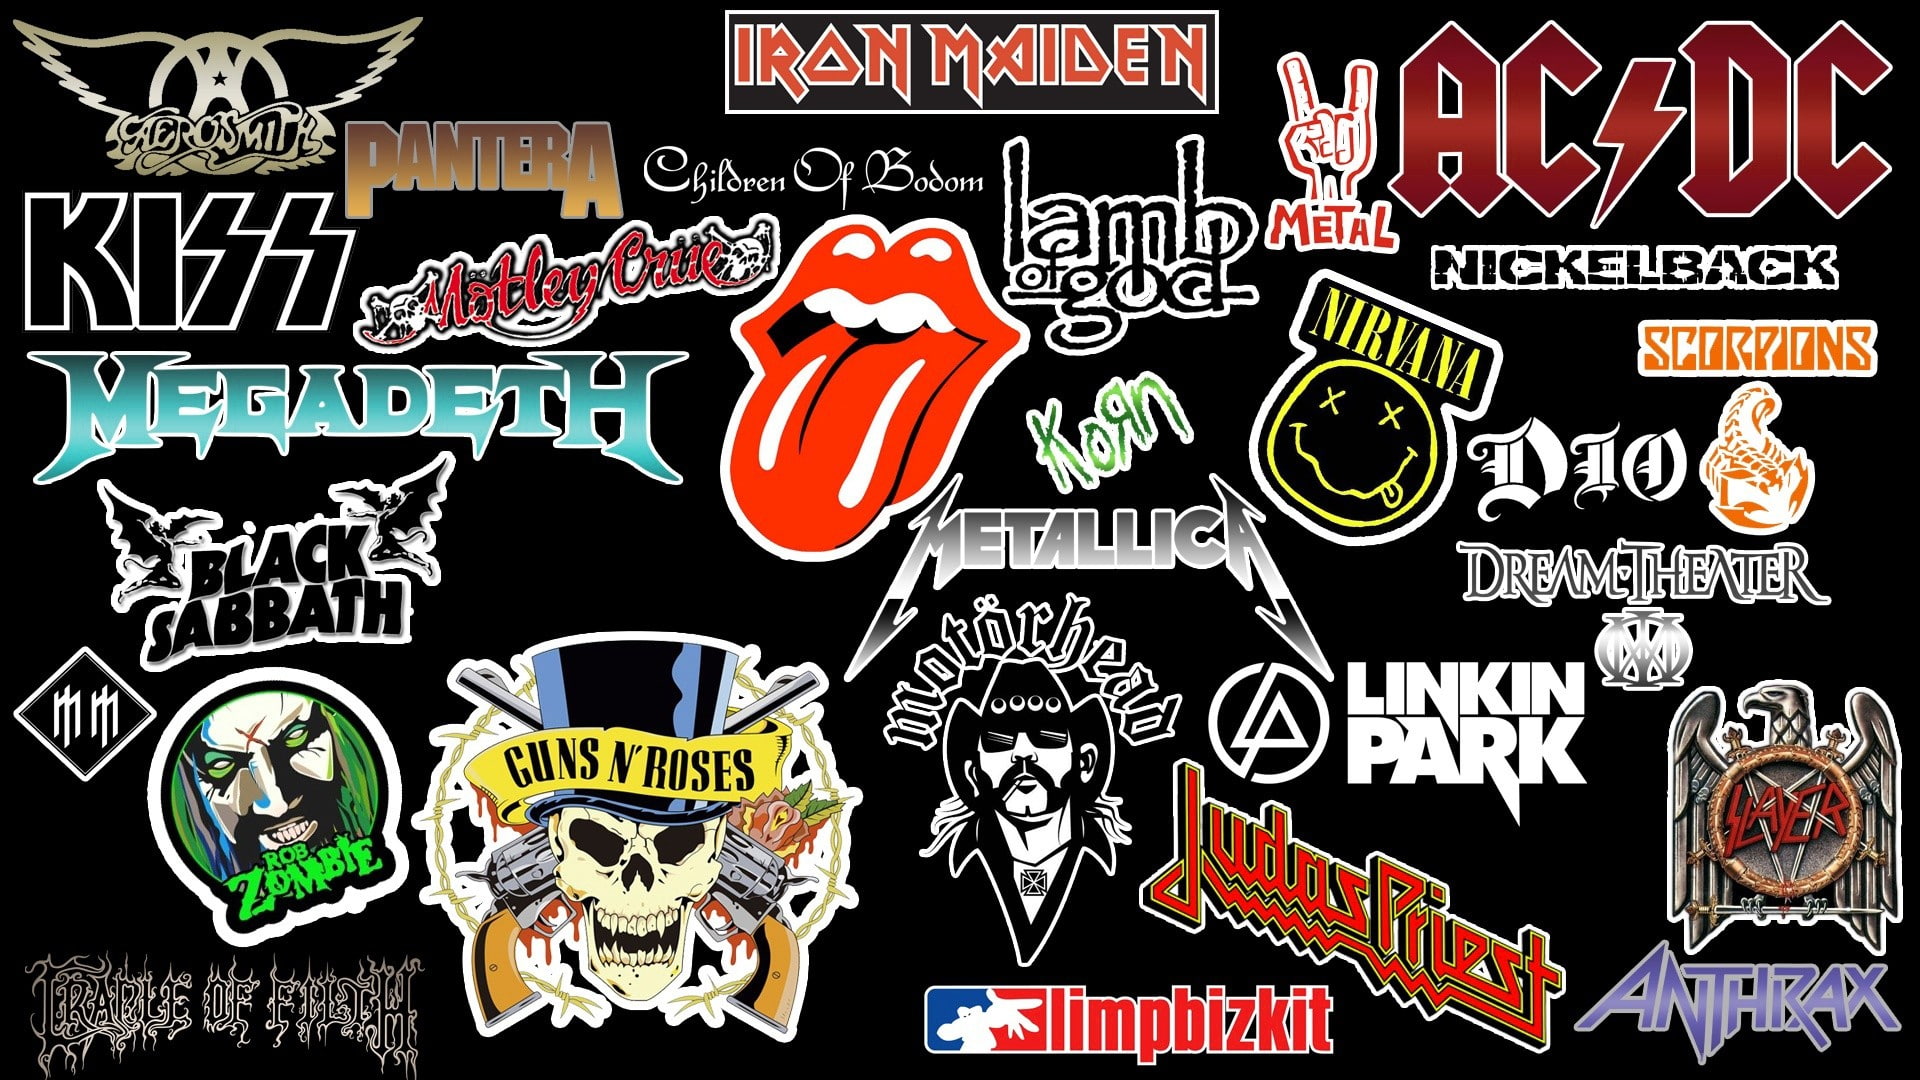 rock n roll, music, rock and roll, bands, rock bands, rock music